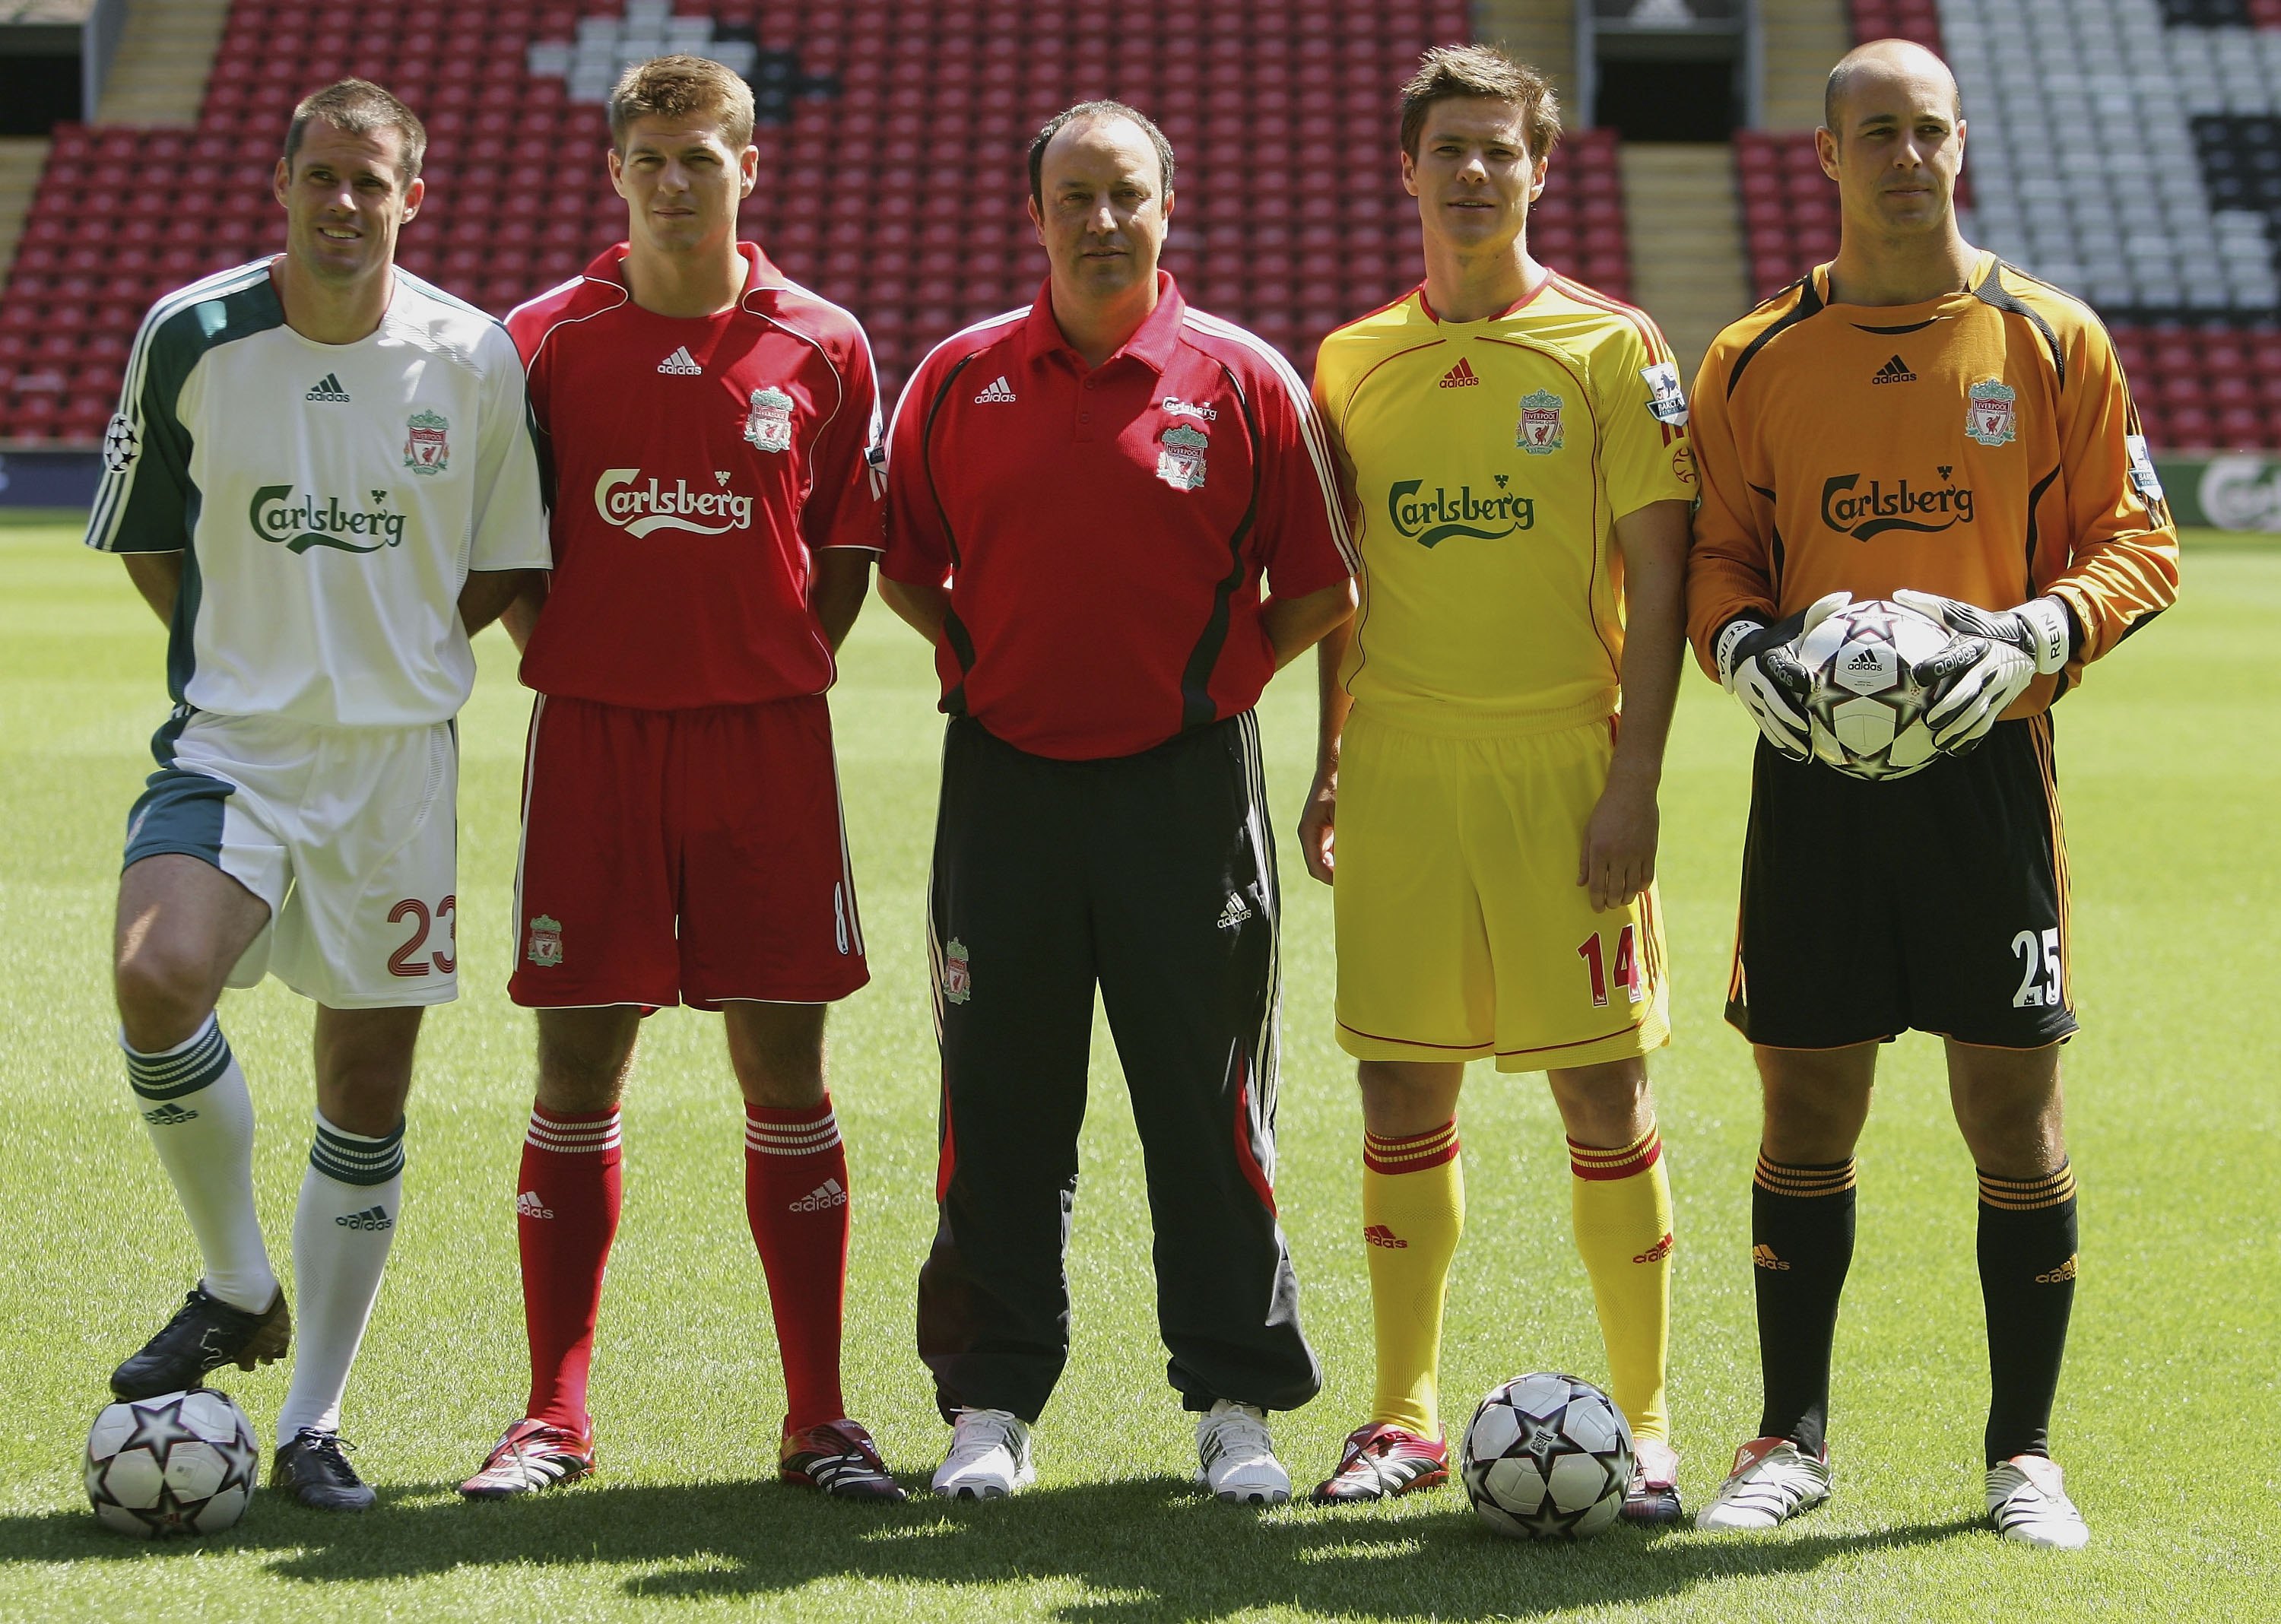 Rafa Benitez (centre) with his star players: (L-R) Local lads Jamie Carragher and Steven Gerrard, along with his fellow Spaniards Xabi Alonso and Pepe Reina